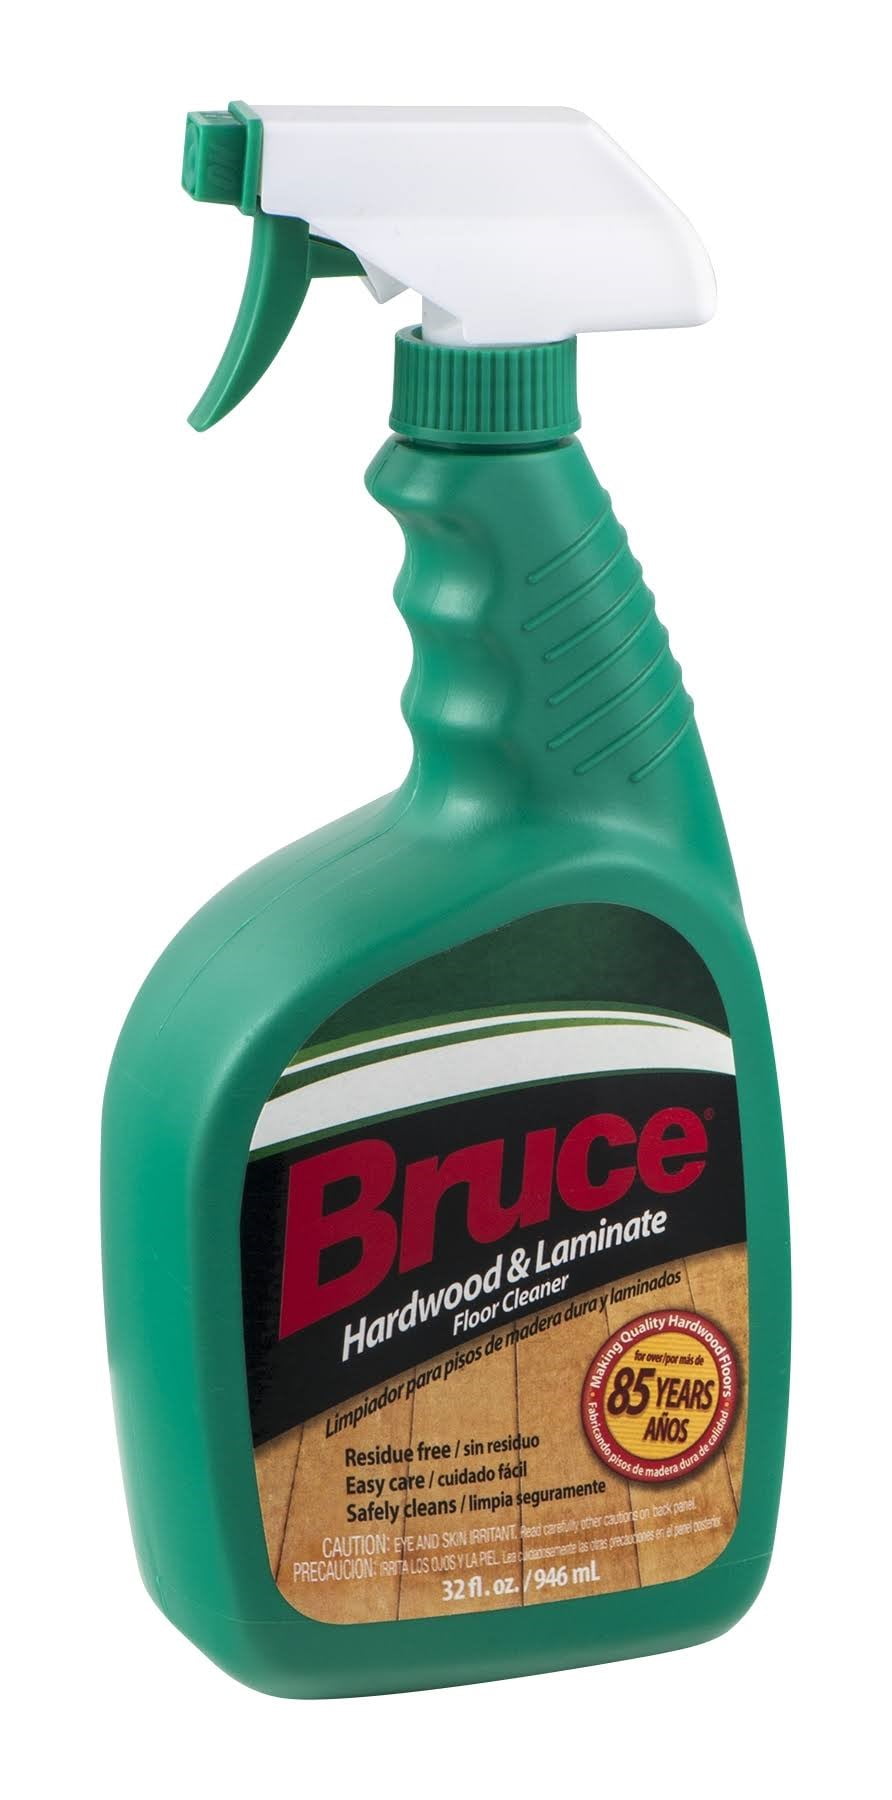 Bruce Hardwood And Laminate Floor, Hardwood Floor Care And Cleaning